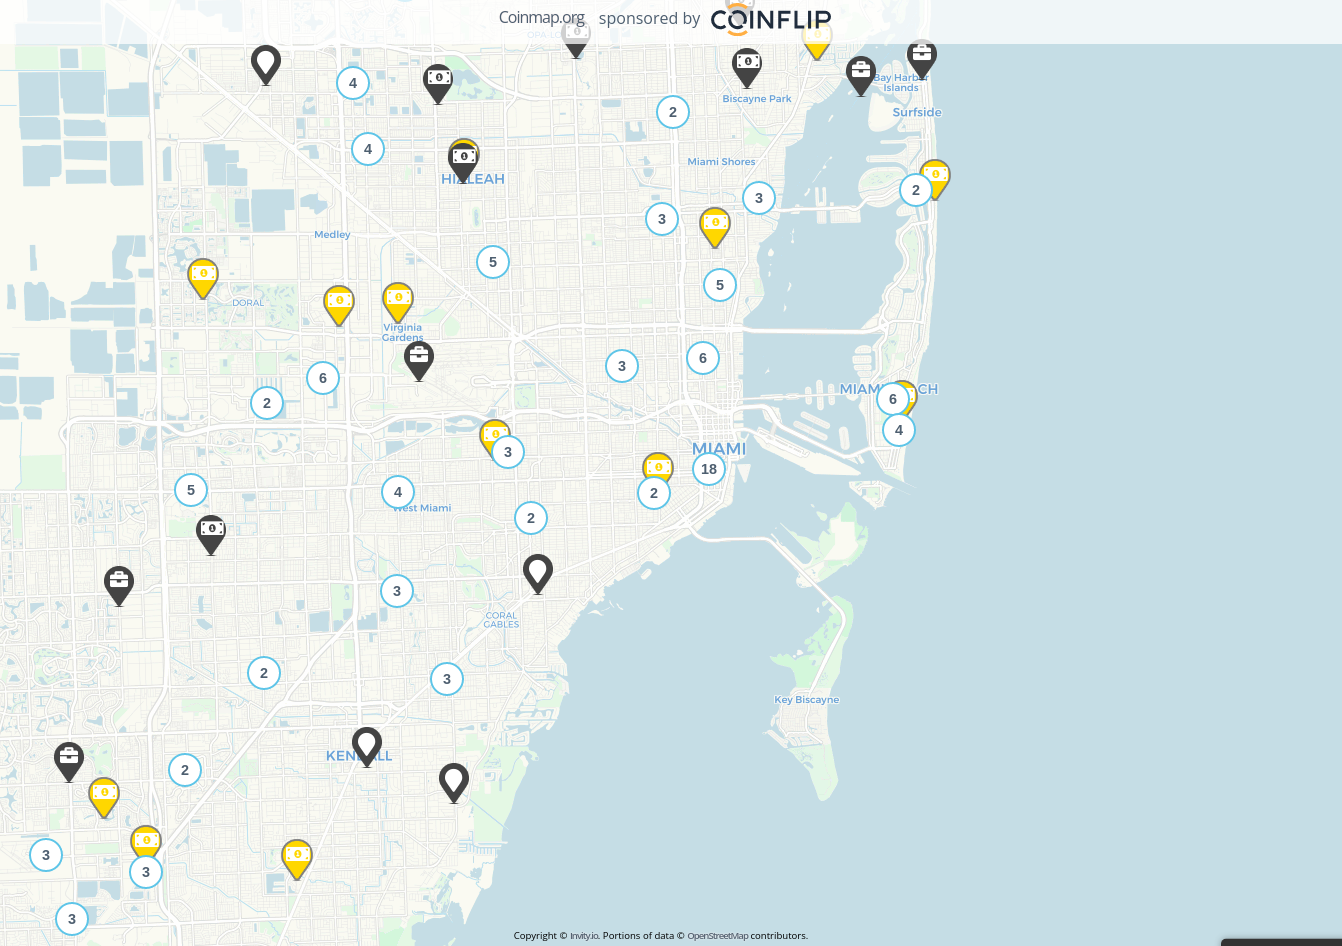 The Miami area alone is host to dozens of crypto venues; soon Florida may see this same density statewide.